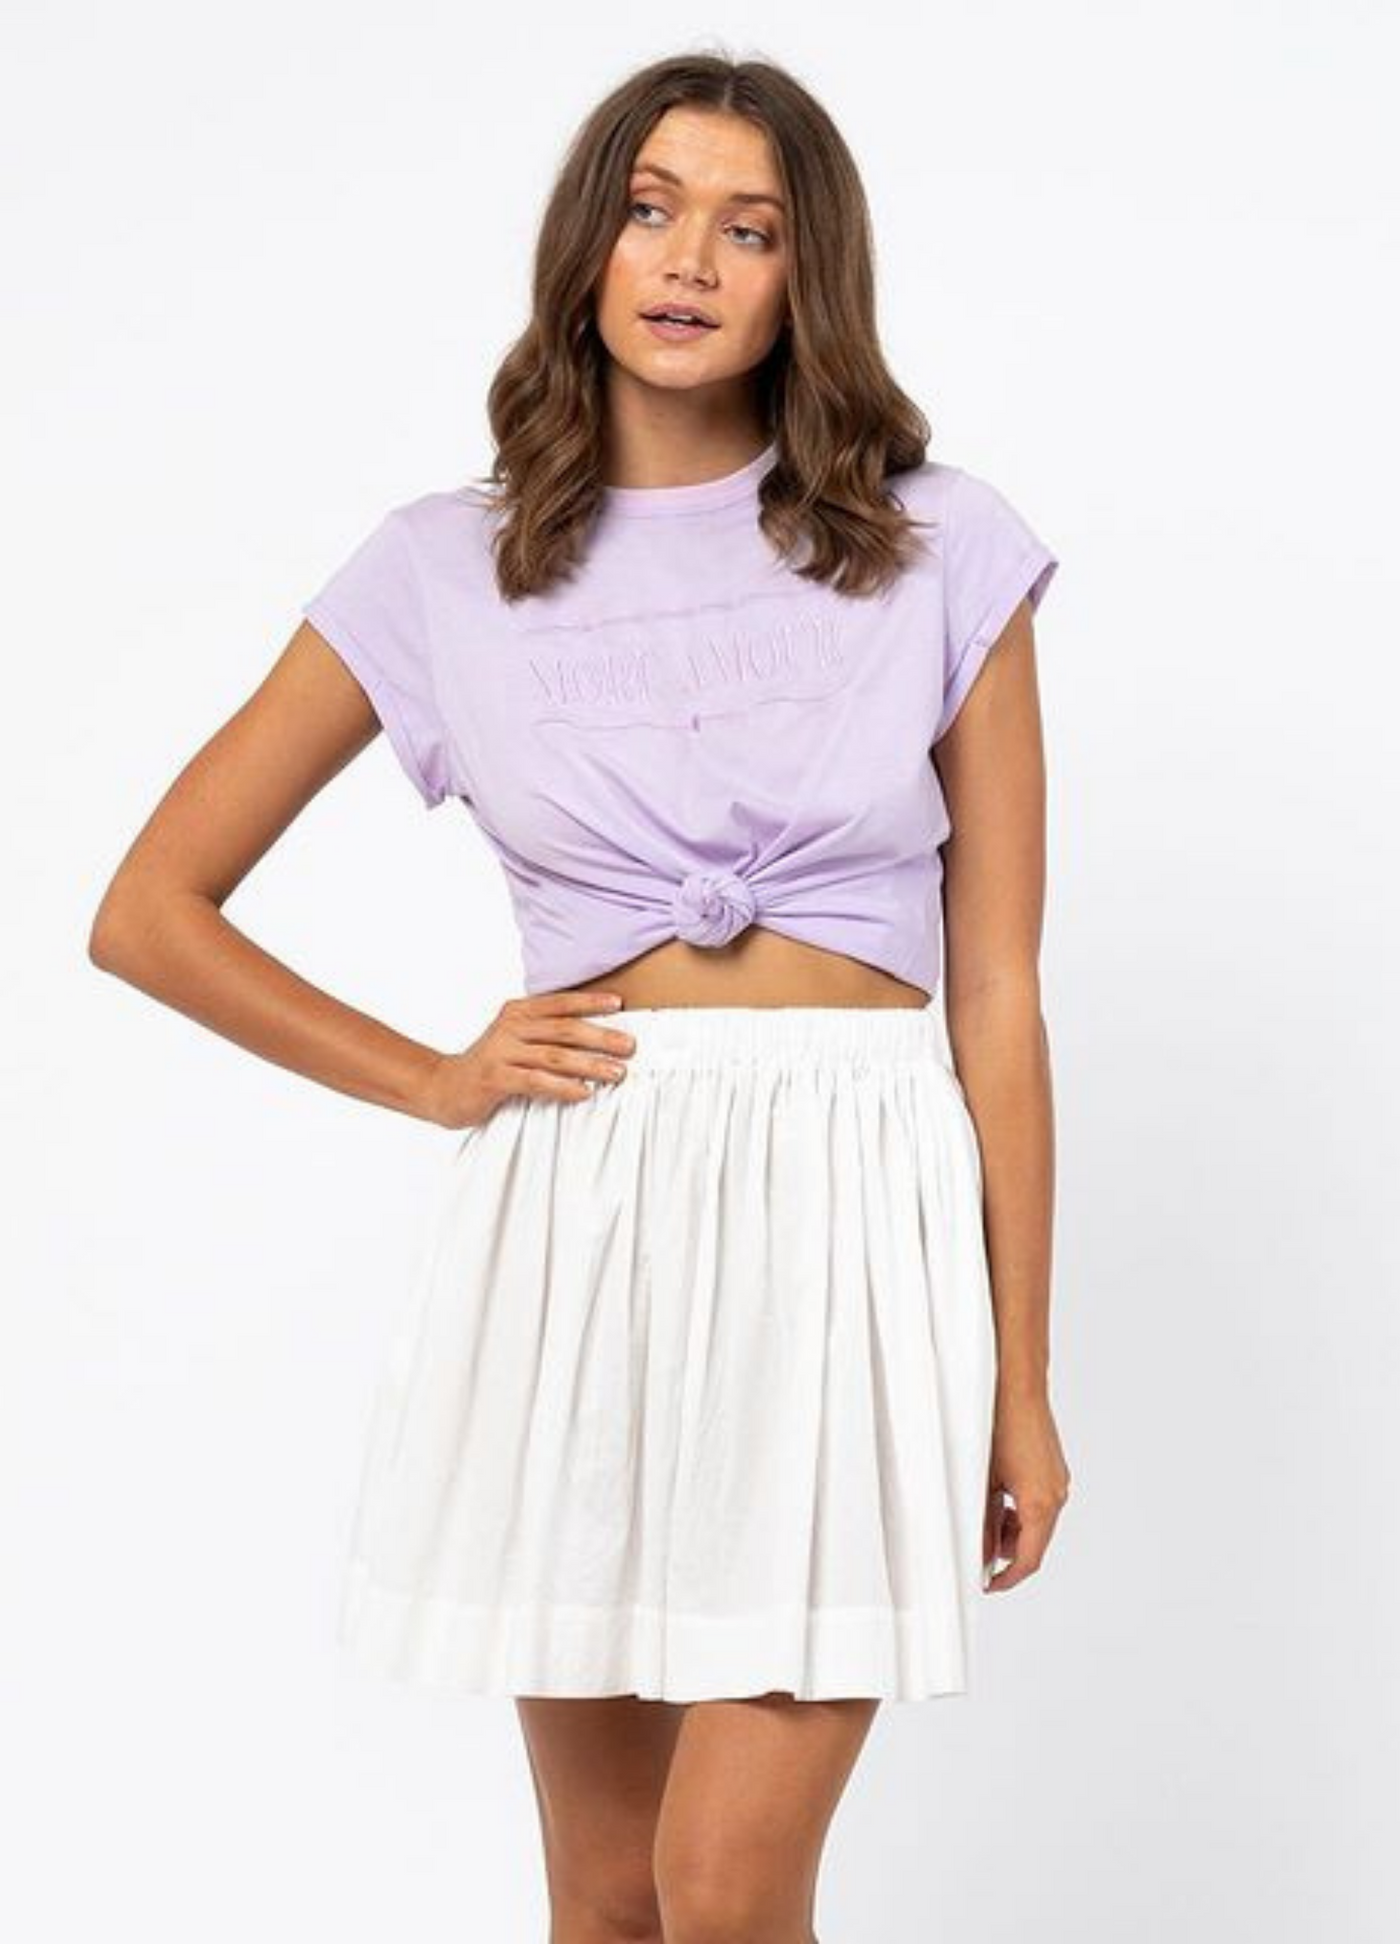 Woman wearing lilac tshirt and white skirt